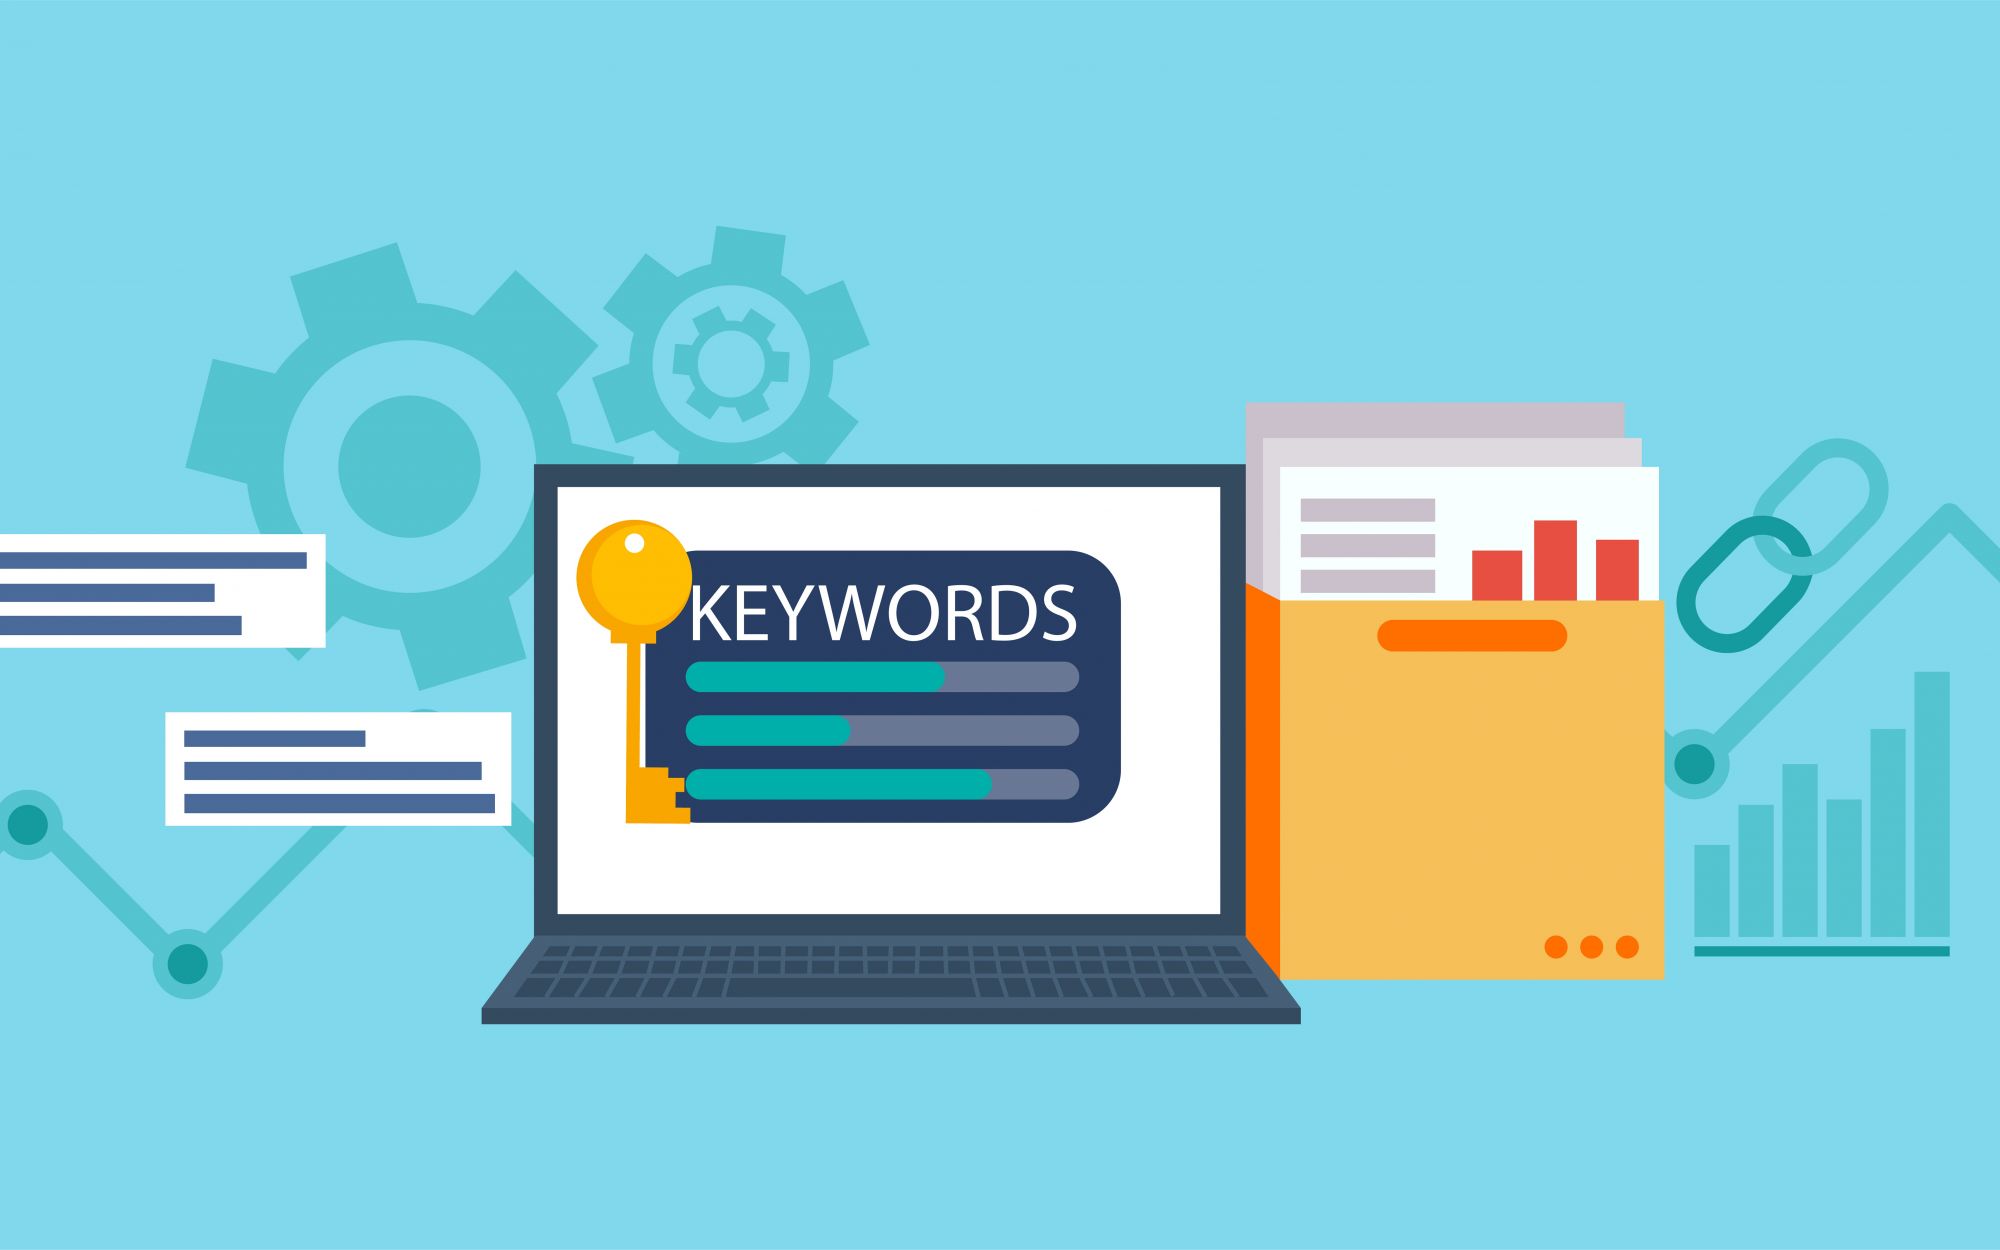 How to correctly write keywords and descriptions